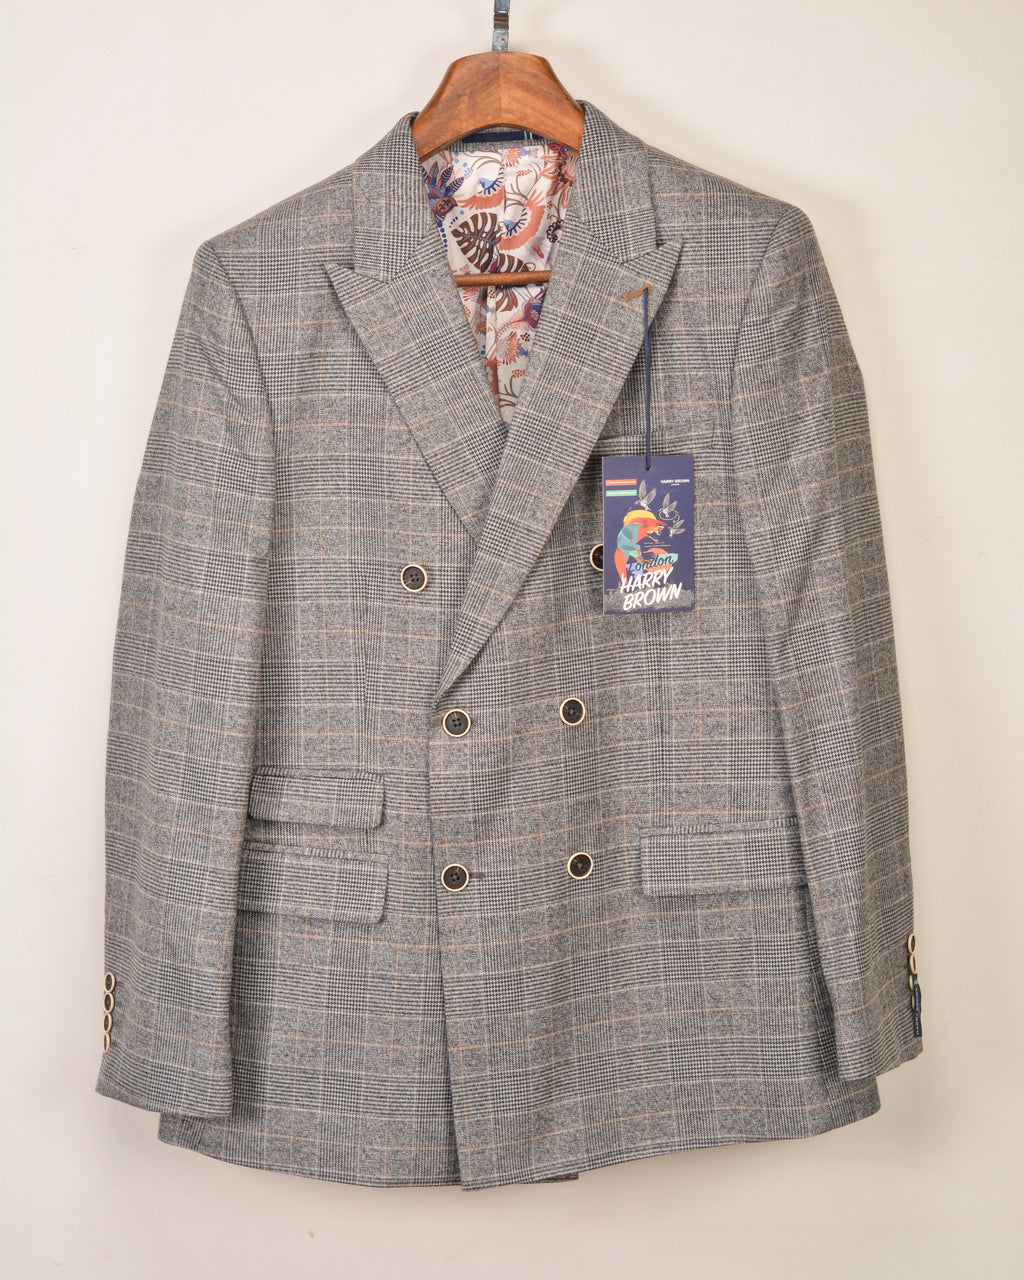 Harry Brown Double-Breasted SUIT IN GREY CHECK